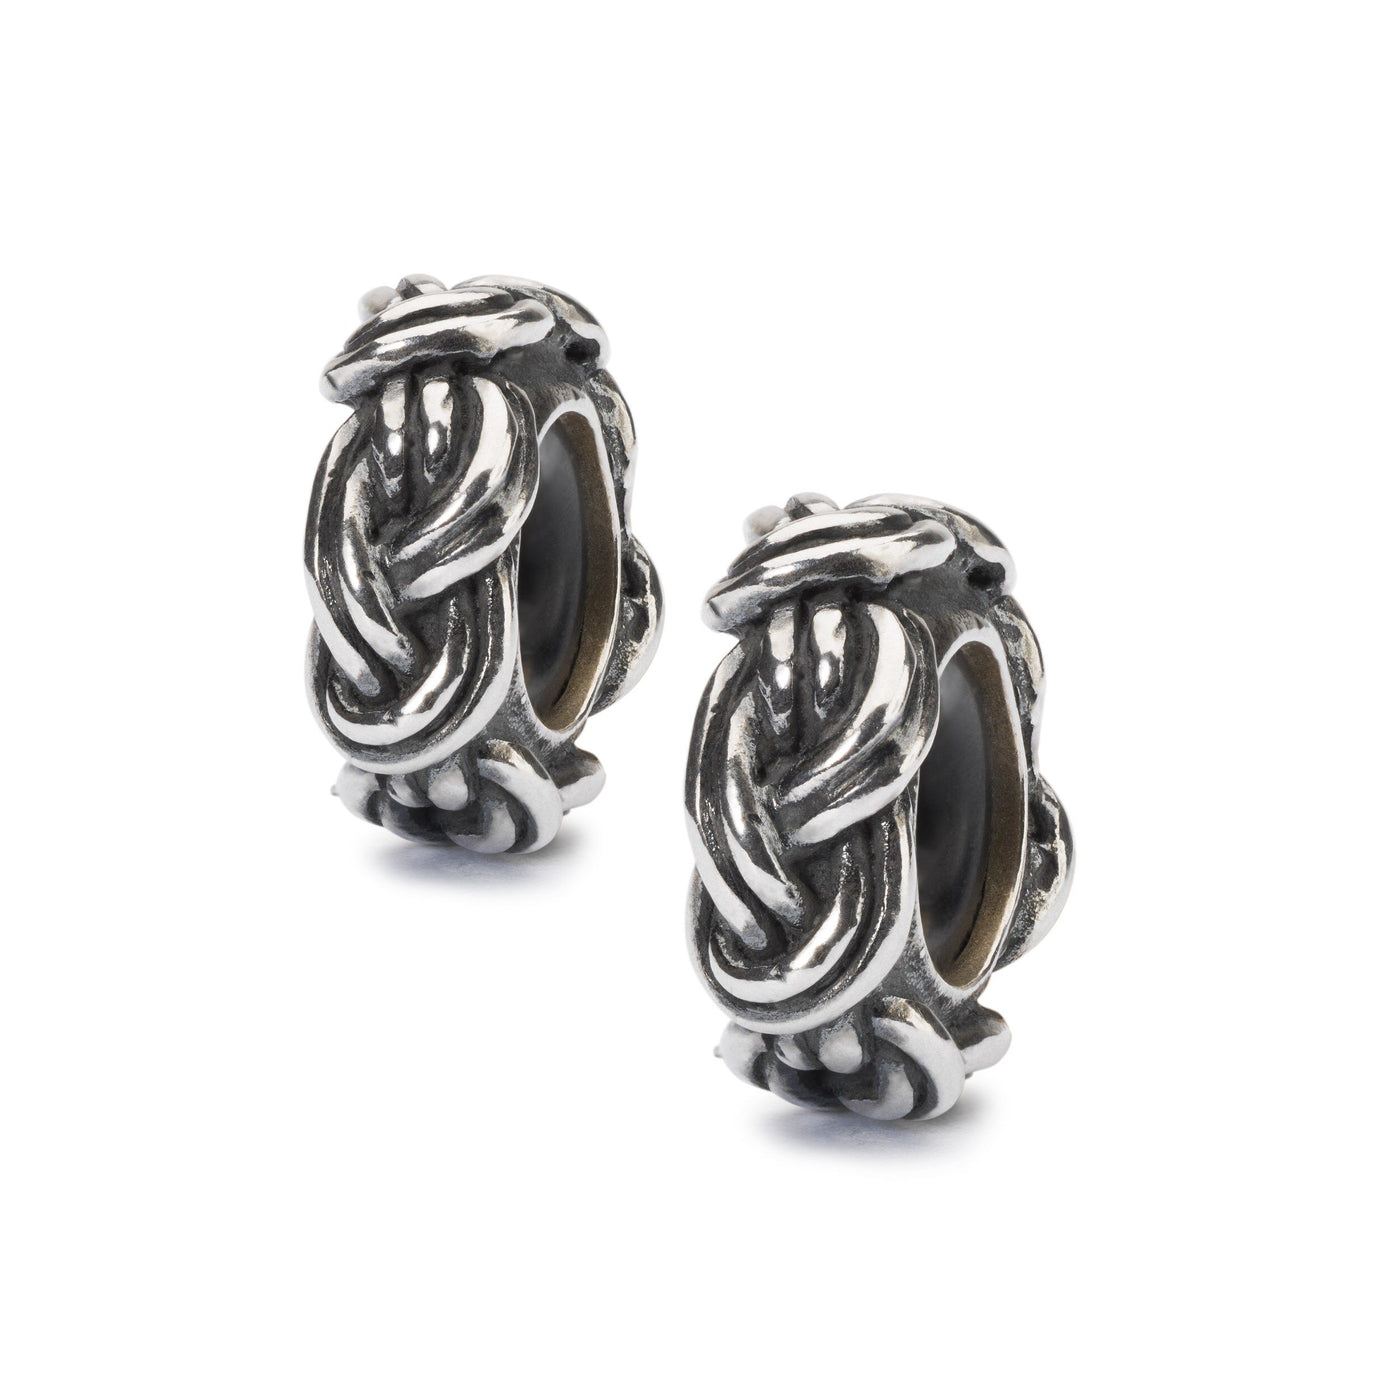 Savoy Knot Spacer (2 pcs) - Trollbeads Canada